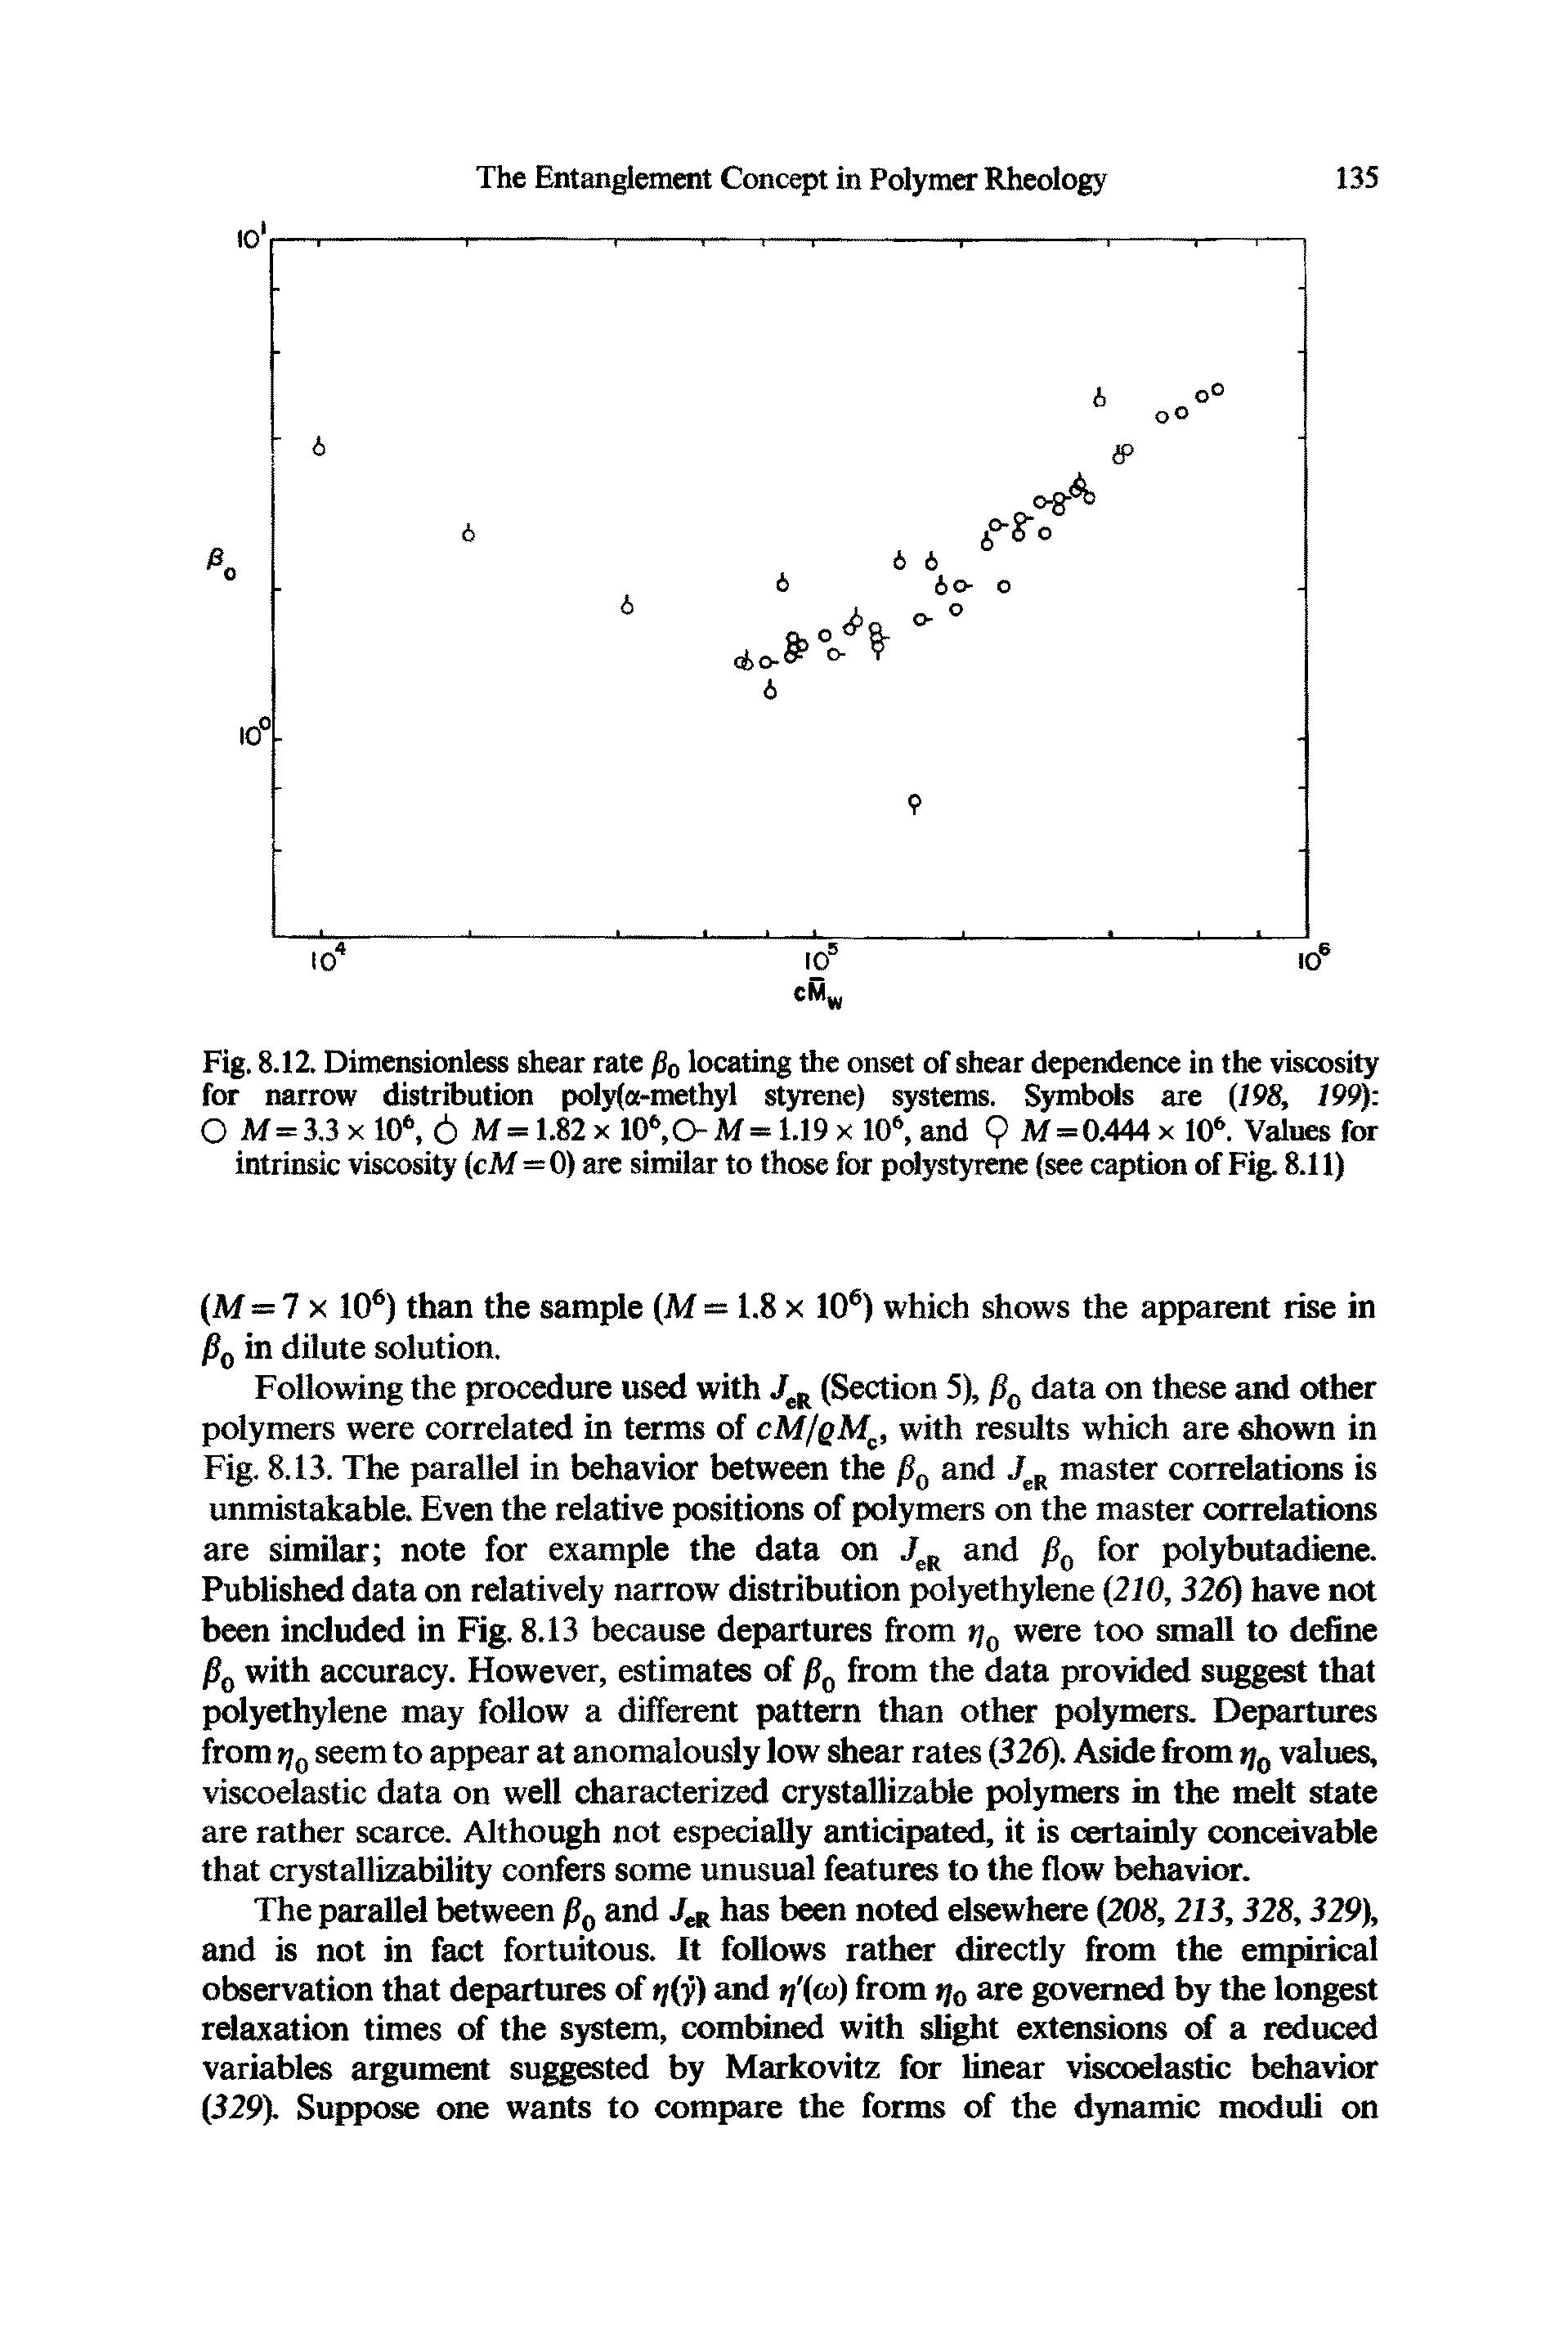 Fig. 8.12. Dimensionless shear rate /30 locating the onset of shear dependence in the viscosity for narrow distribution poly(a-methyl styrene) systems. Symbols are (198, 199) O M = 3.3 x 106, 6 M=1.82x 106,O-M= 1.19 x 106, and 9 M = 0.444 x 106. Values for intrinsic viscosity (cM=0) are similar to those for polystyrene (see caption of Fig. 8.11)...